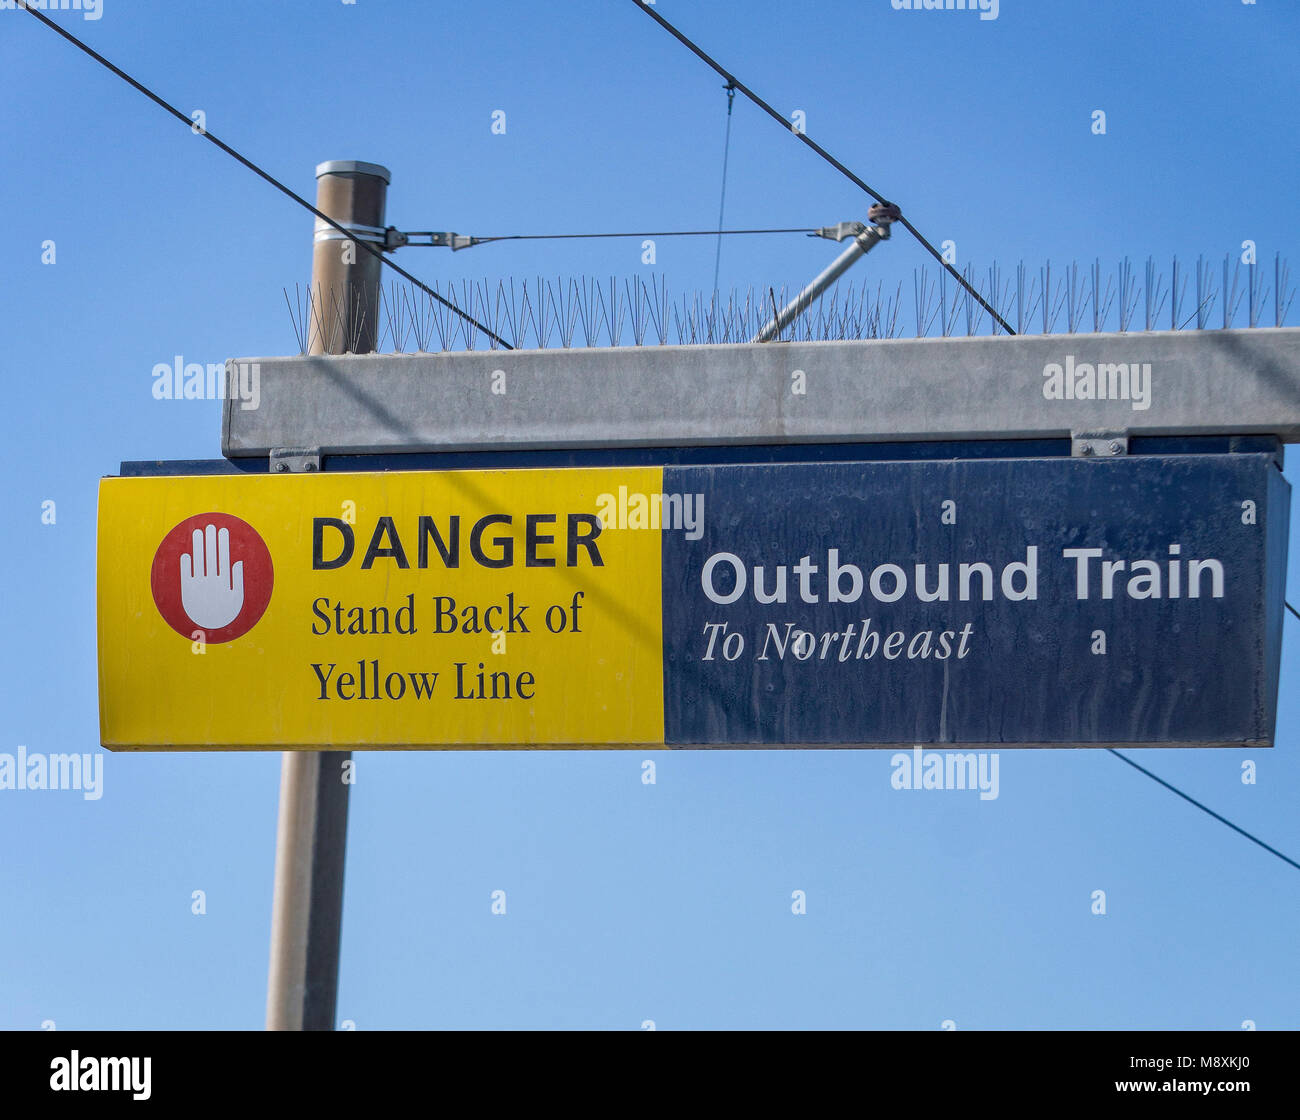 Danger Stand Back of Yellow Line Stock Photo